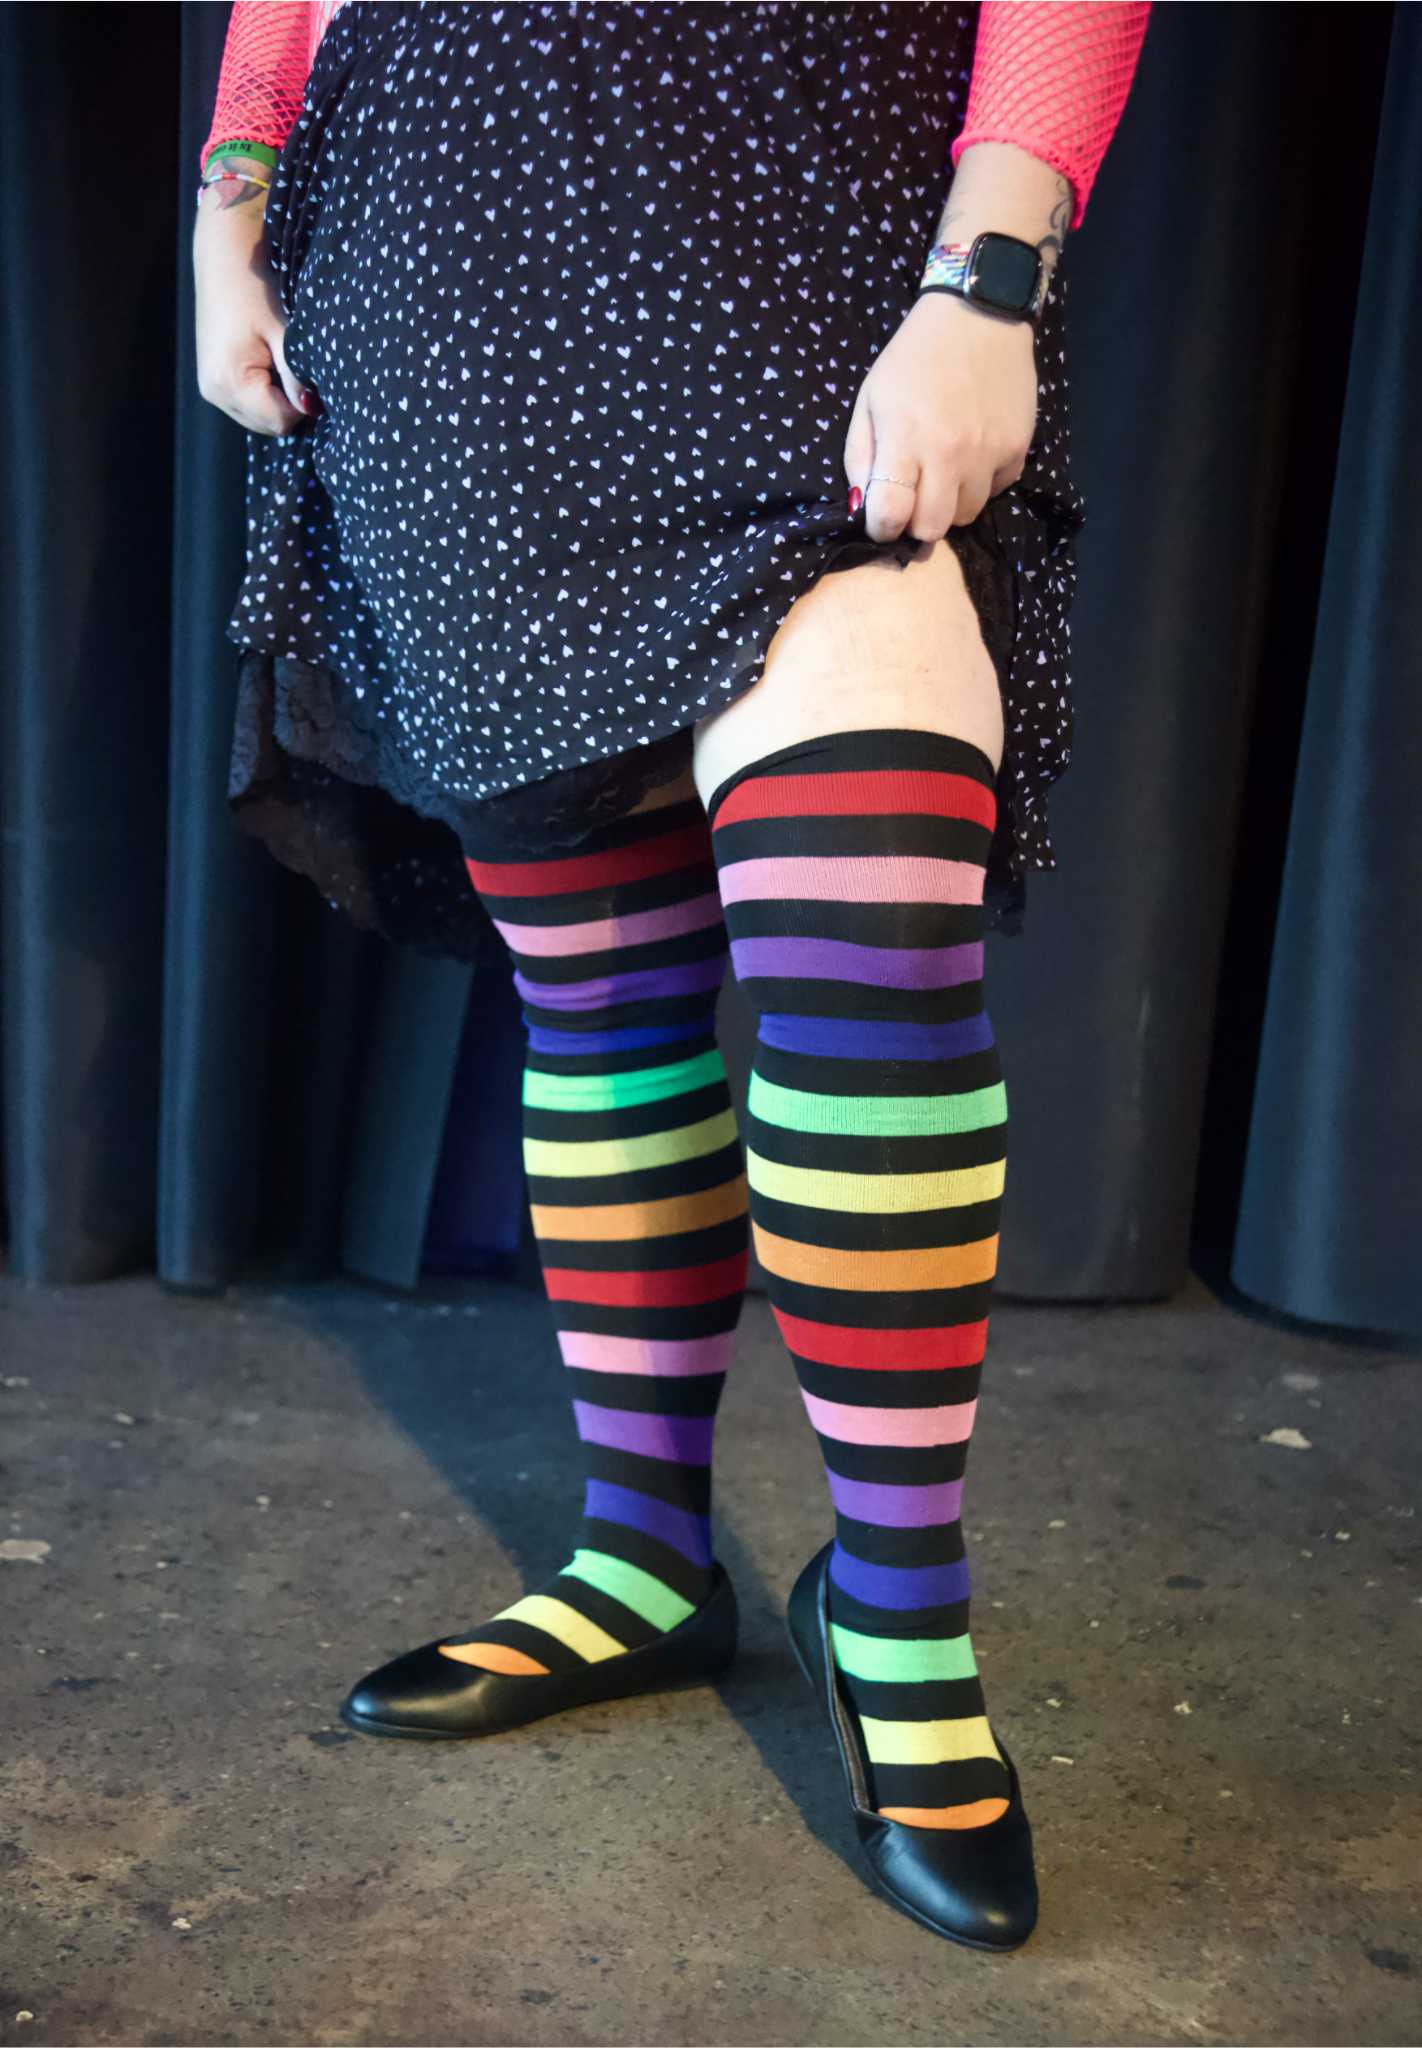 Plus size model wearing Rainbow Over the Knee Rainbow Socks with the leg extended